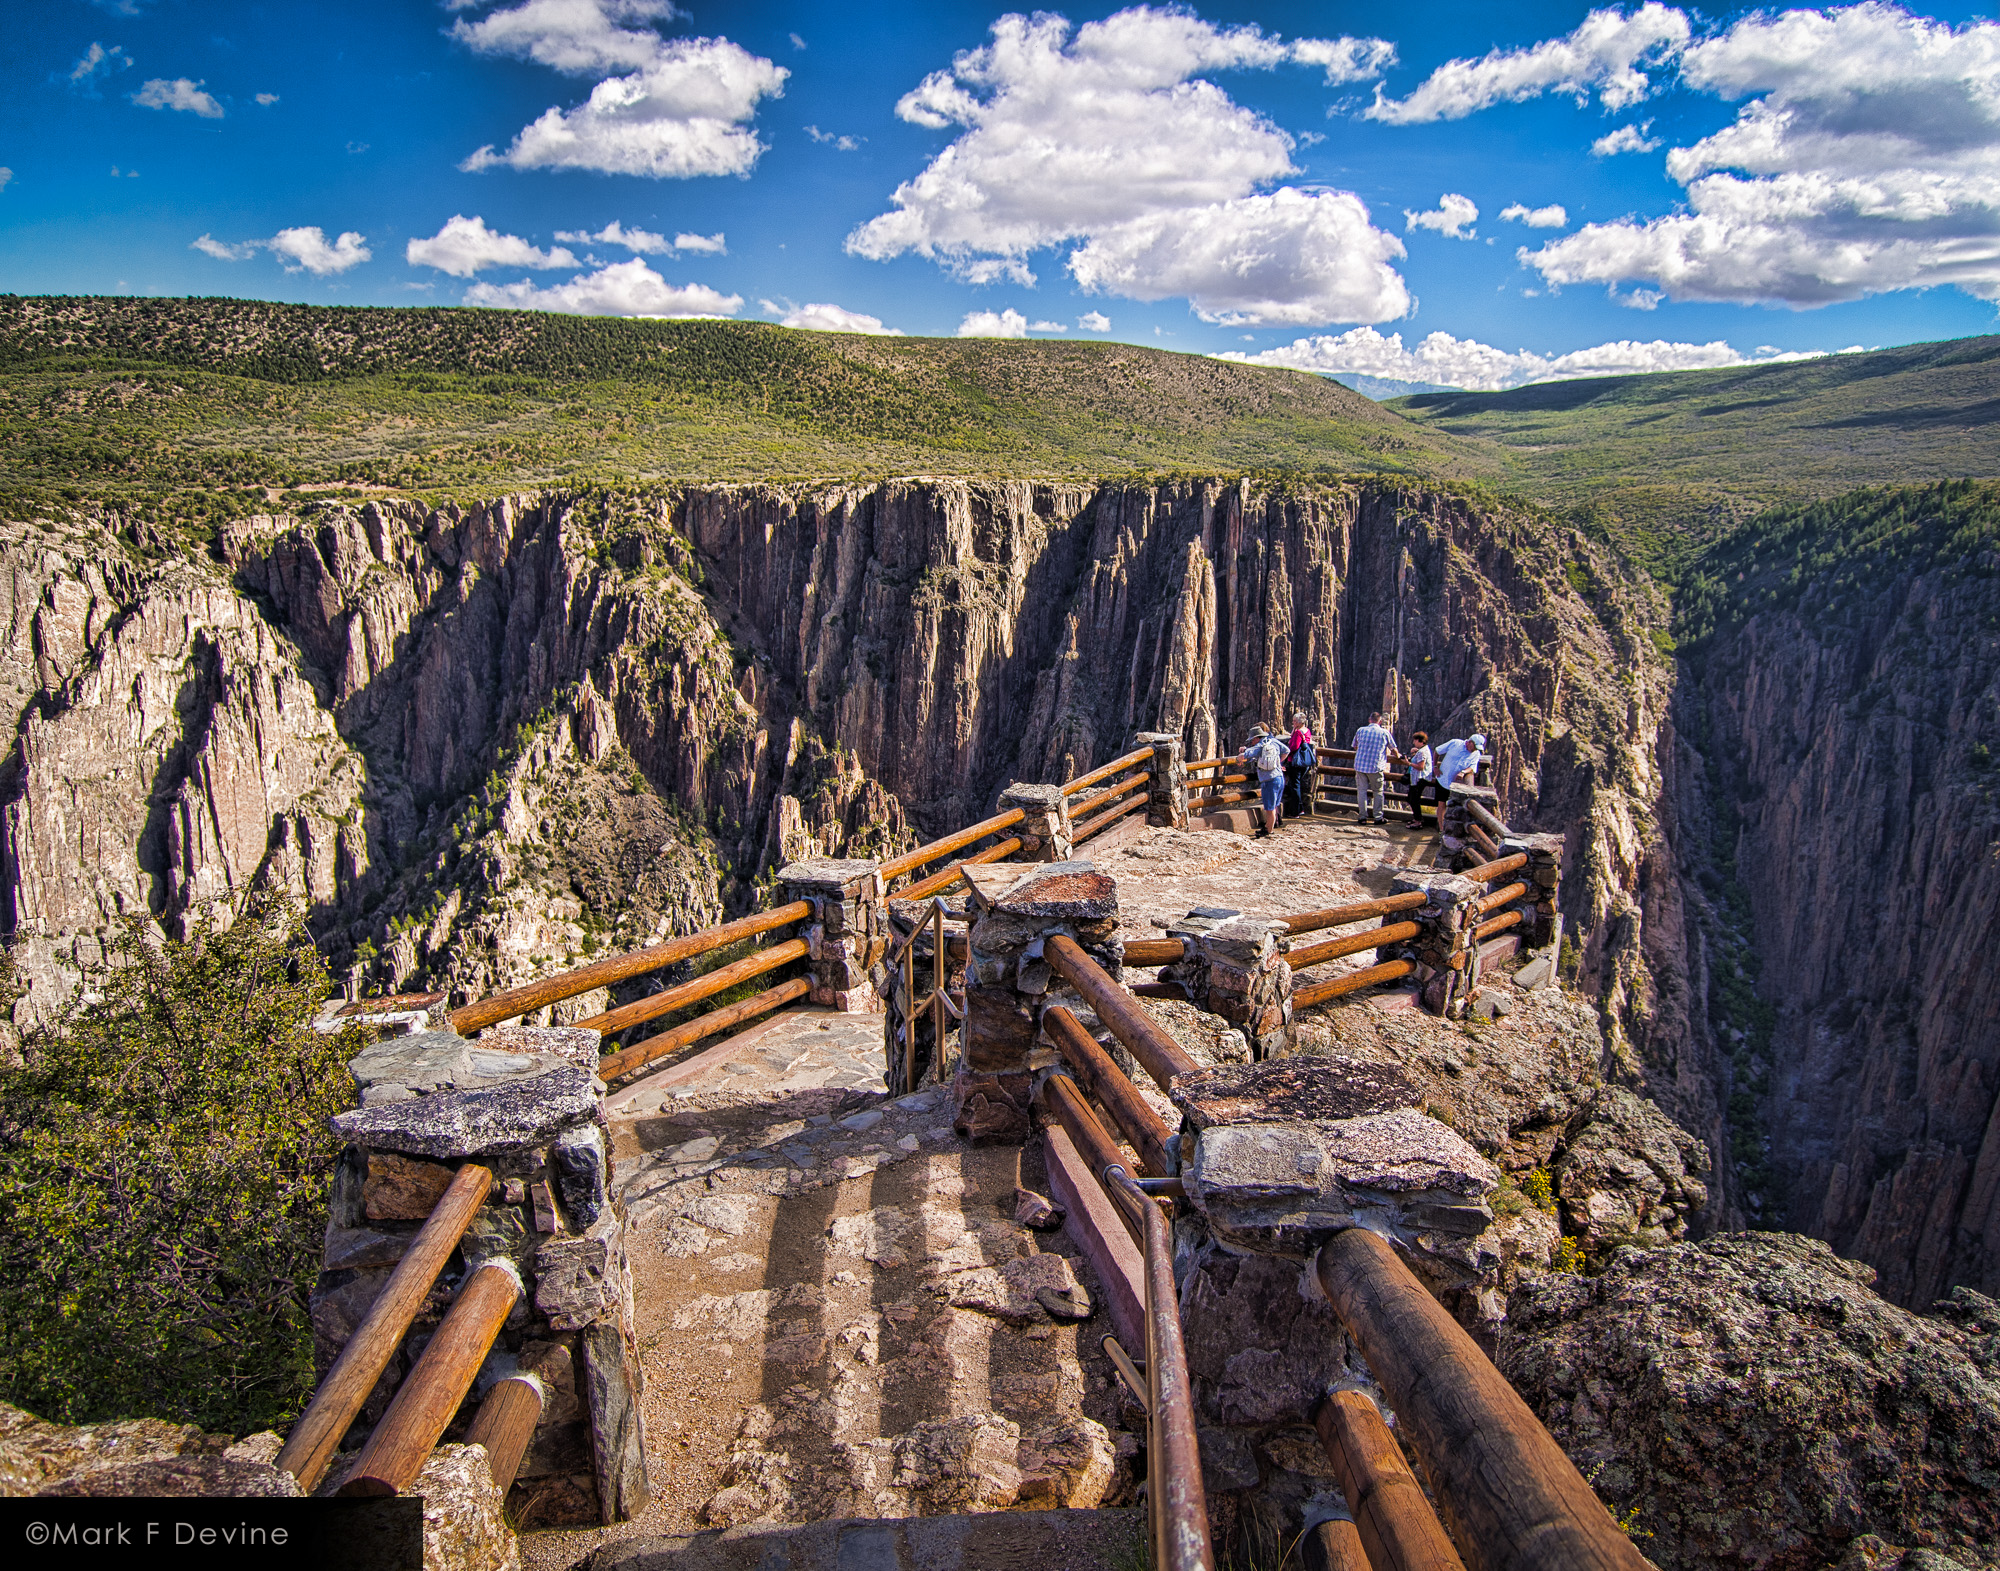 Gunnison Point overlook provides just one of many spectacular views along the south rim of Black Canyon of the Gunnison National...